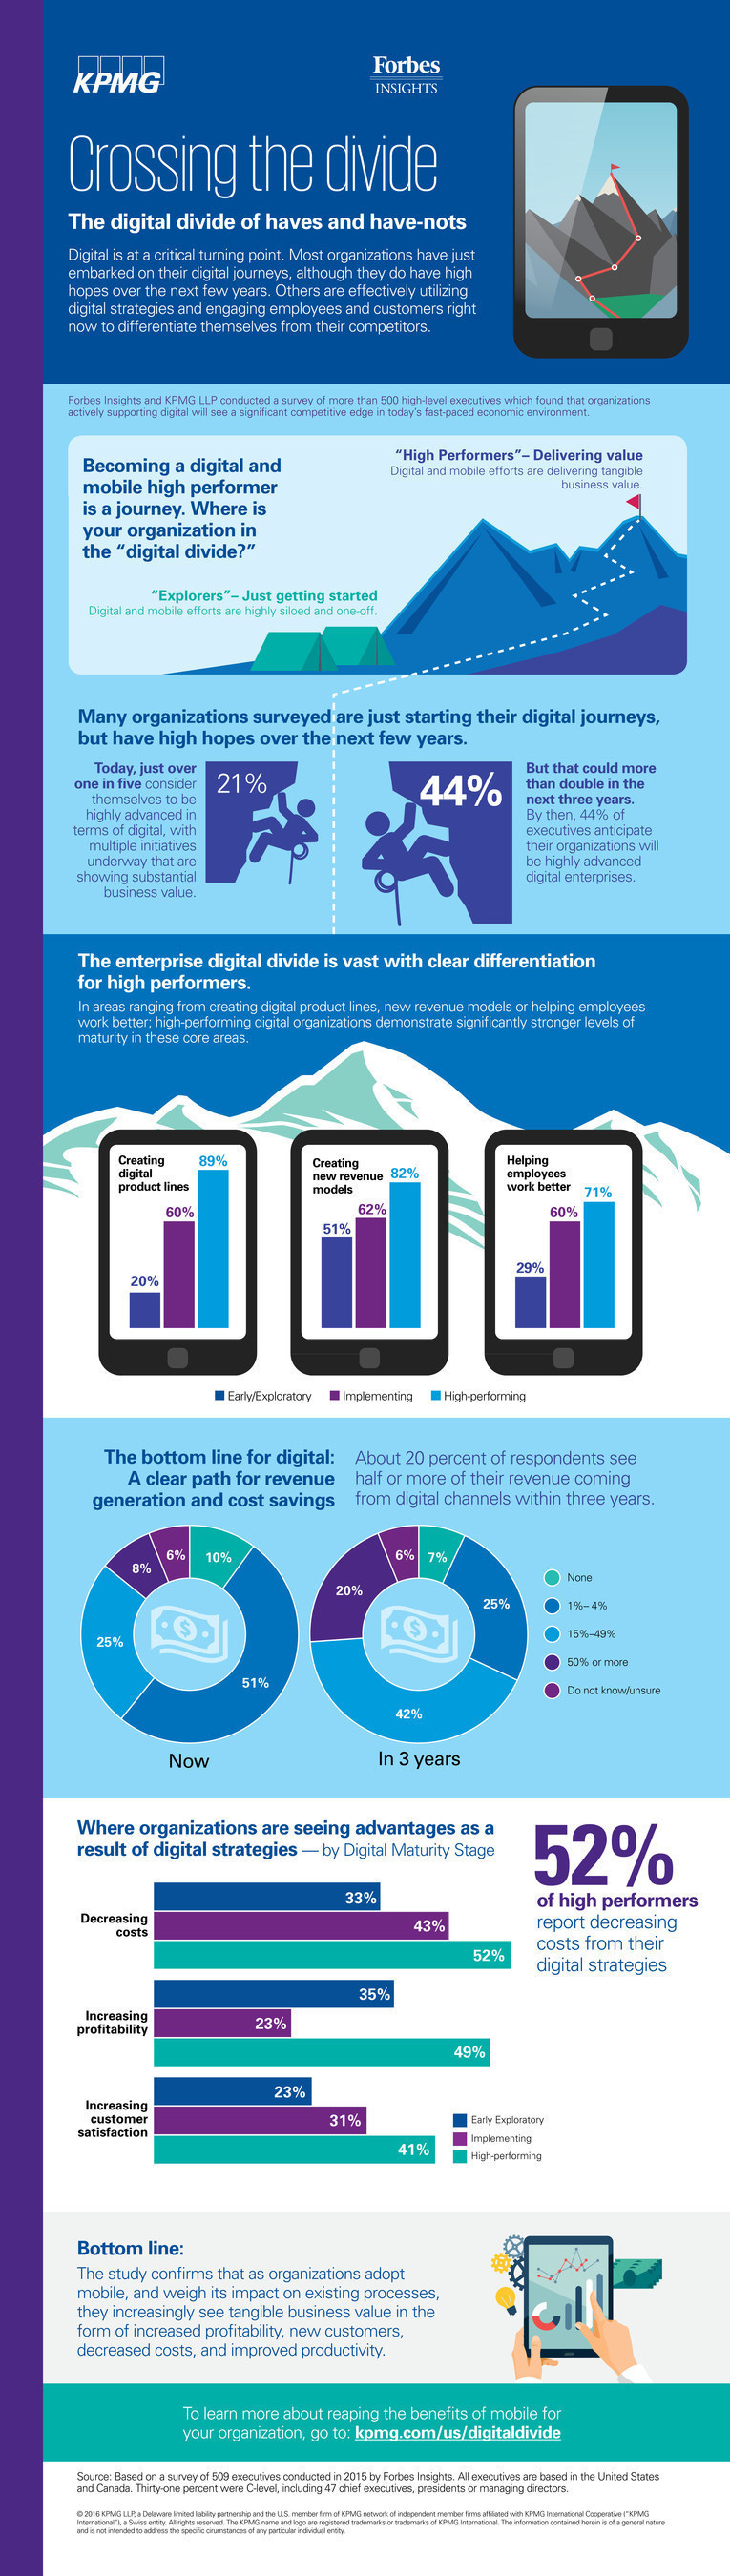 Digital and mobile efforts are delivering tangible business results. But according to a new KPMG survey, a "Digital Divide" of haves and have-nots exists among companies.